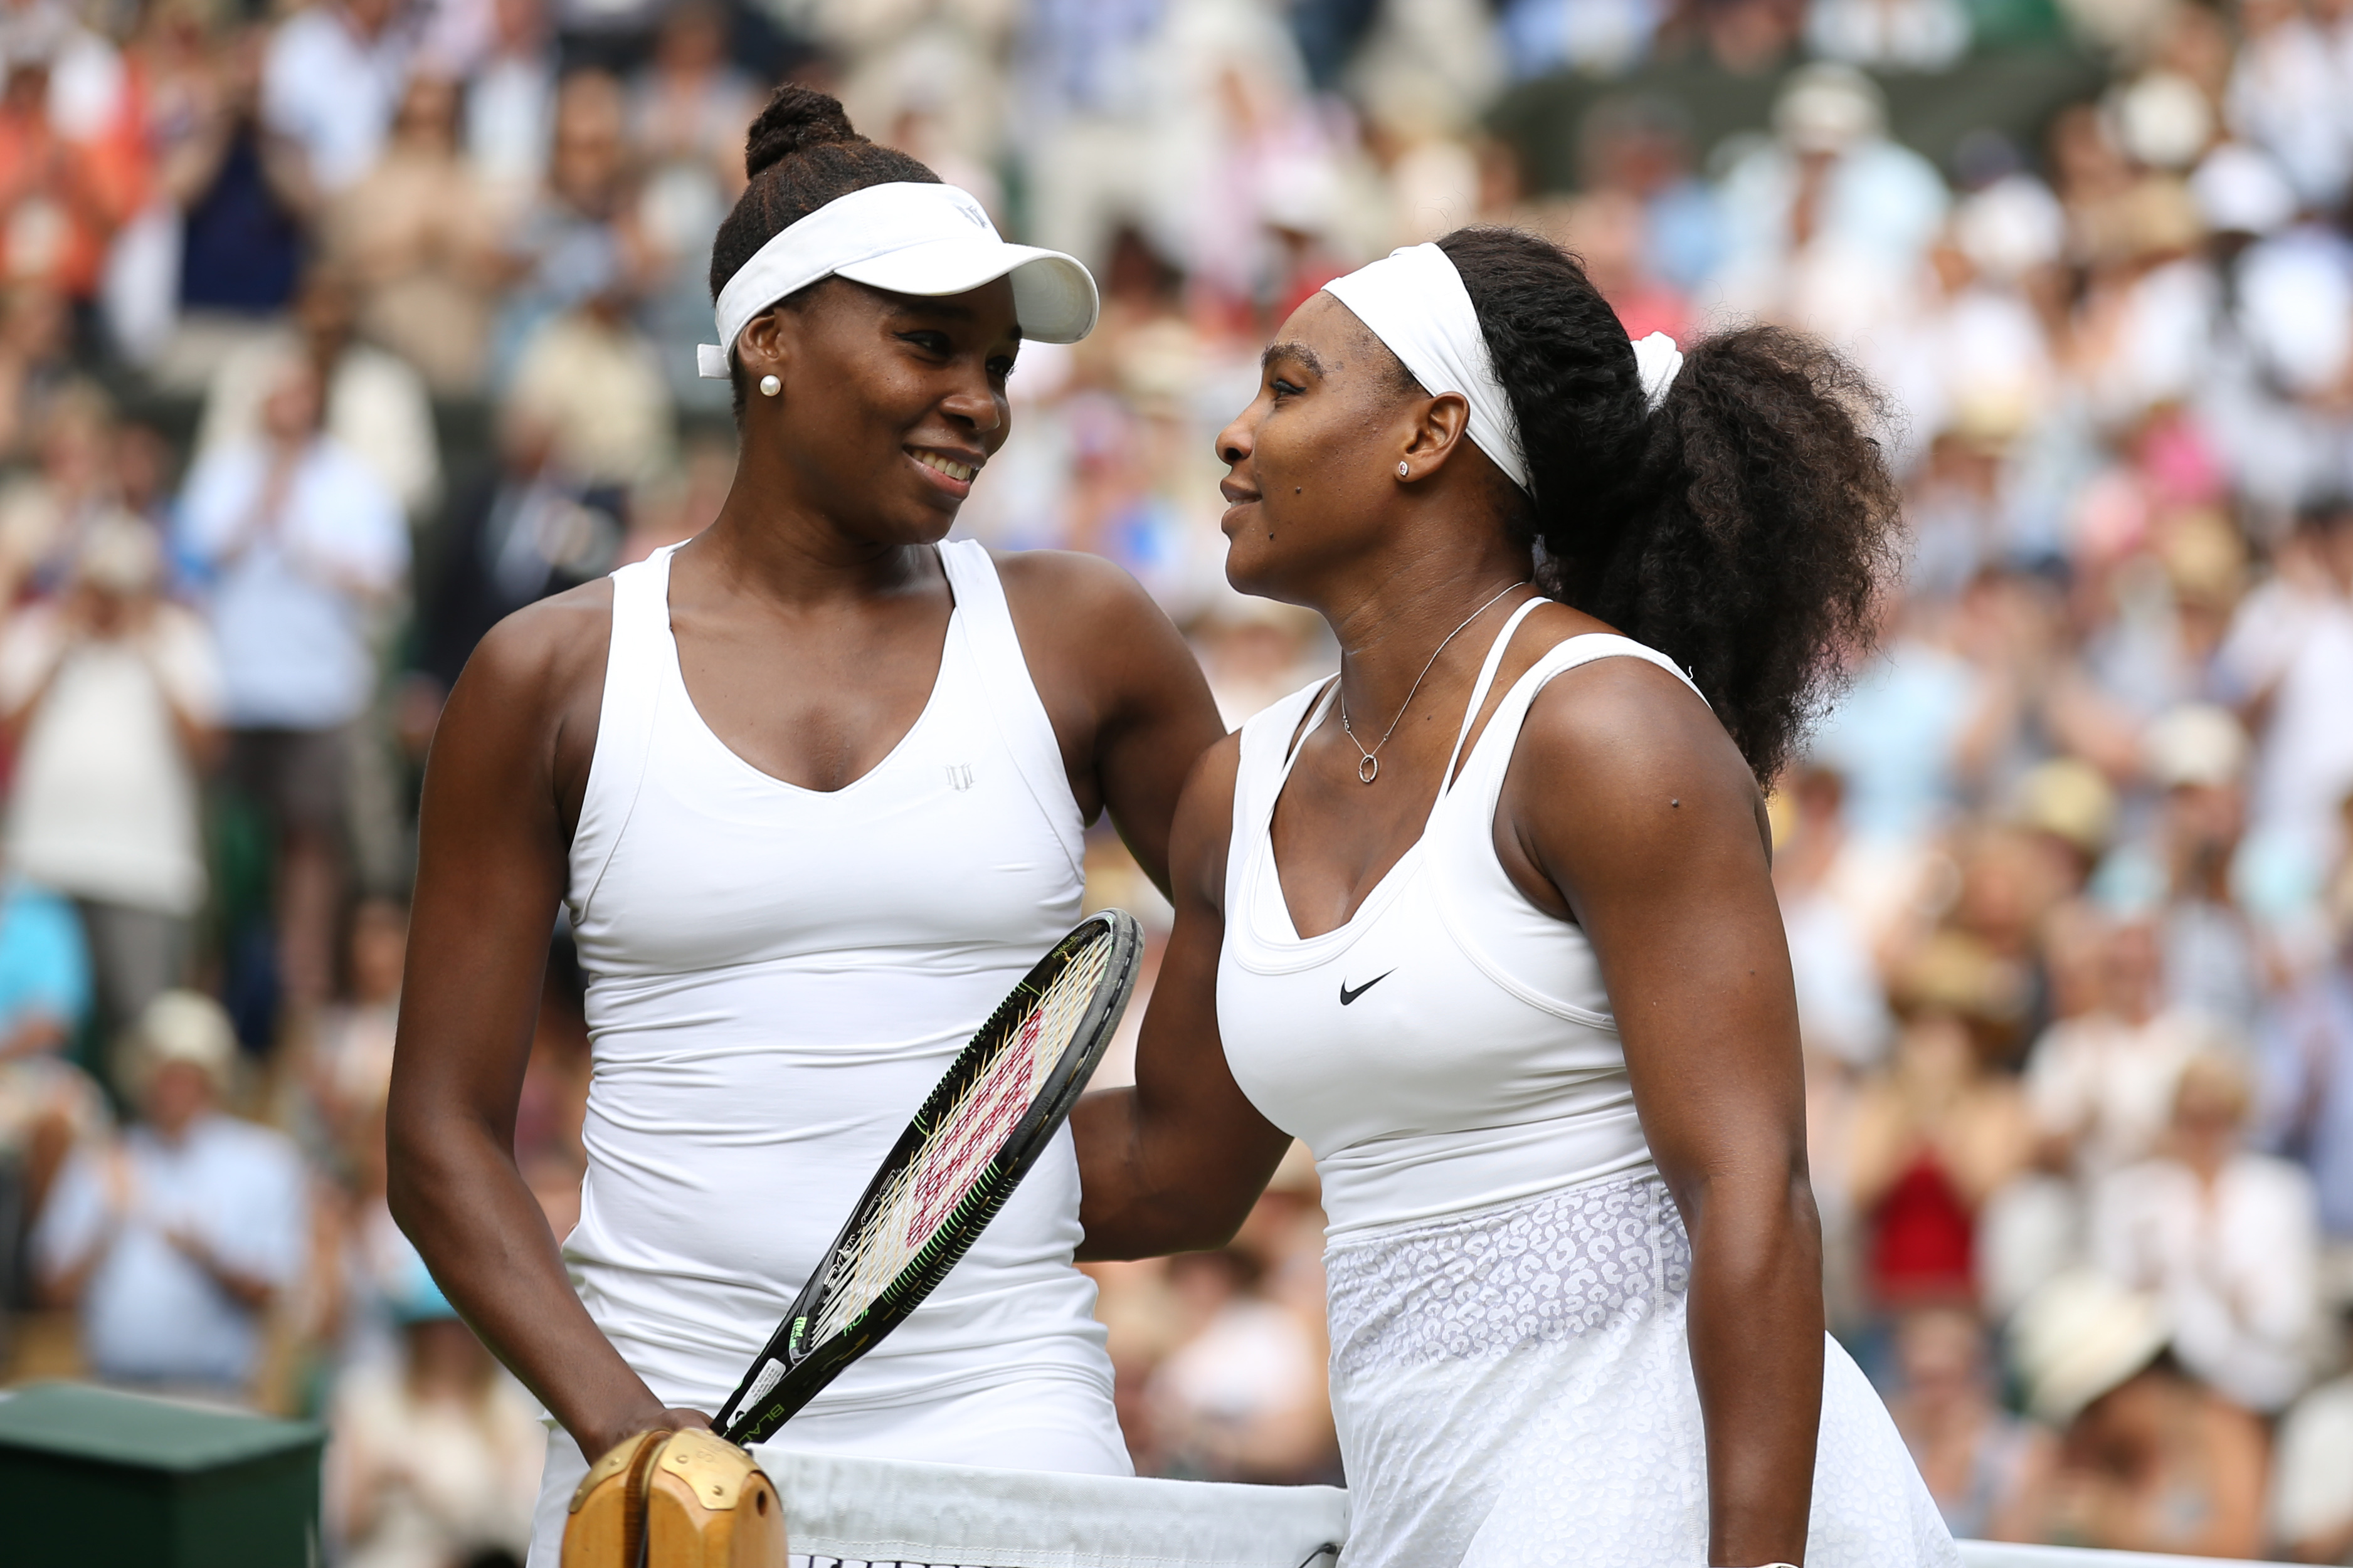 It's war — and yet not: Venus, left, and Serena Williams at Wimbledon in July 2015 (Mark Leech—Getty Images)